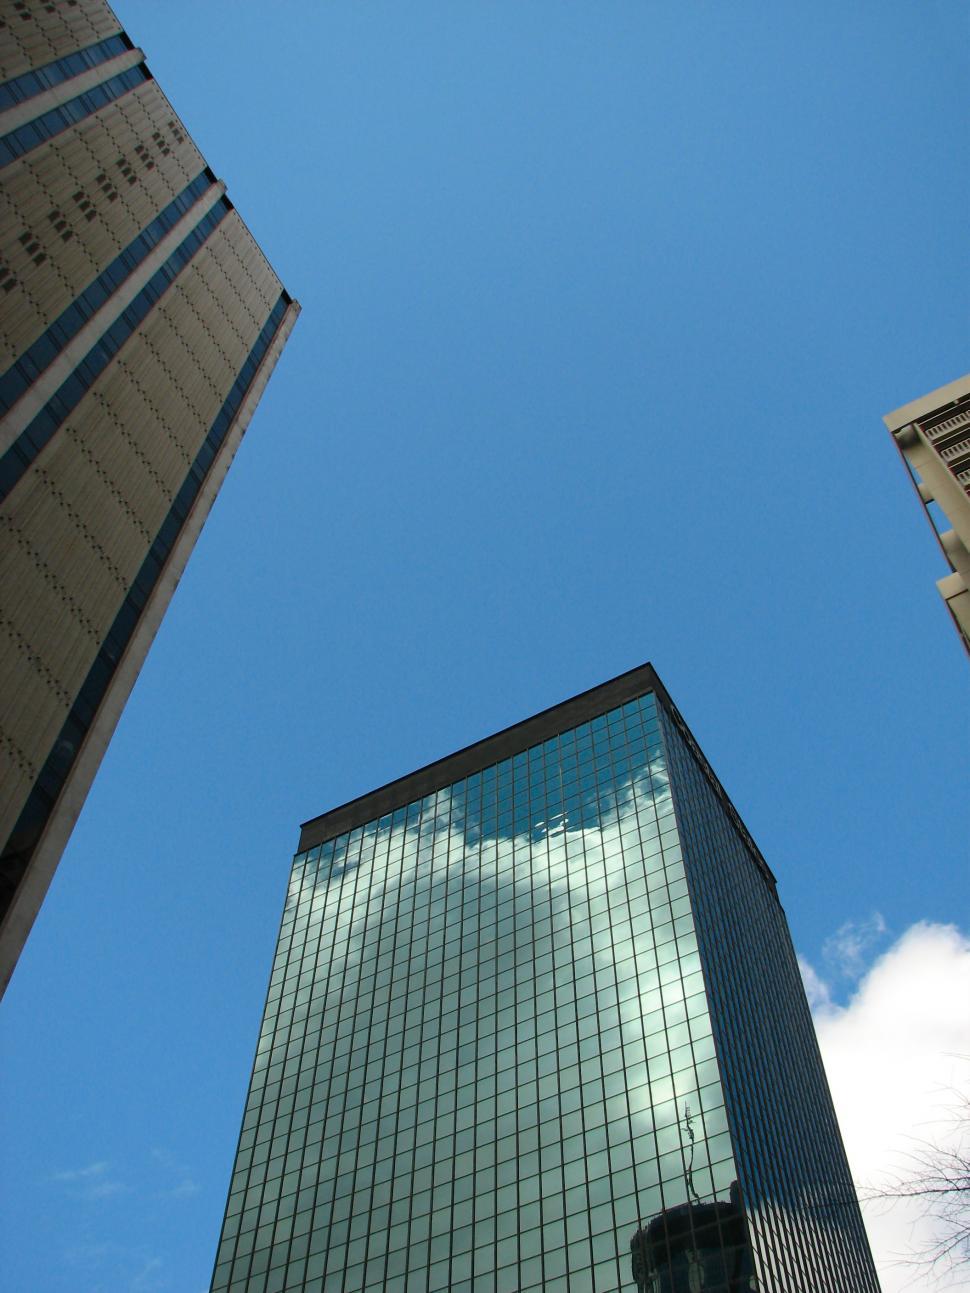 Free Image of Tall office buildings with a blue sky background 